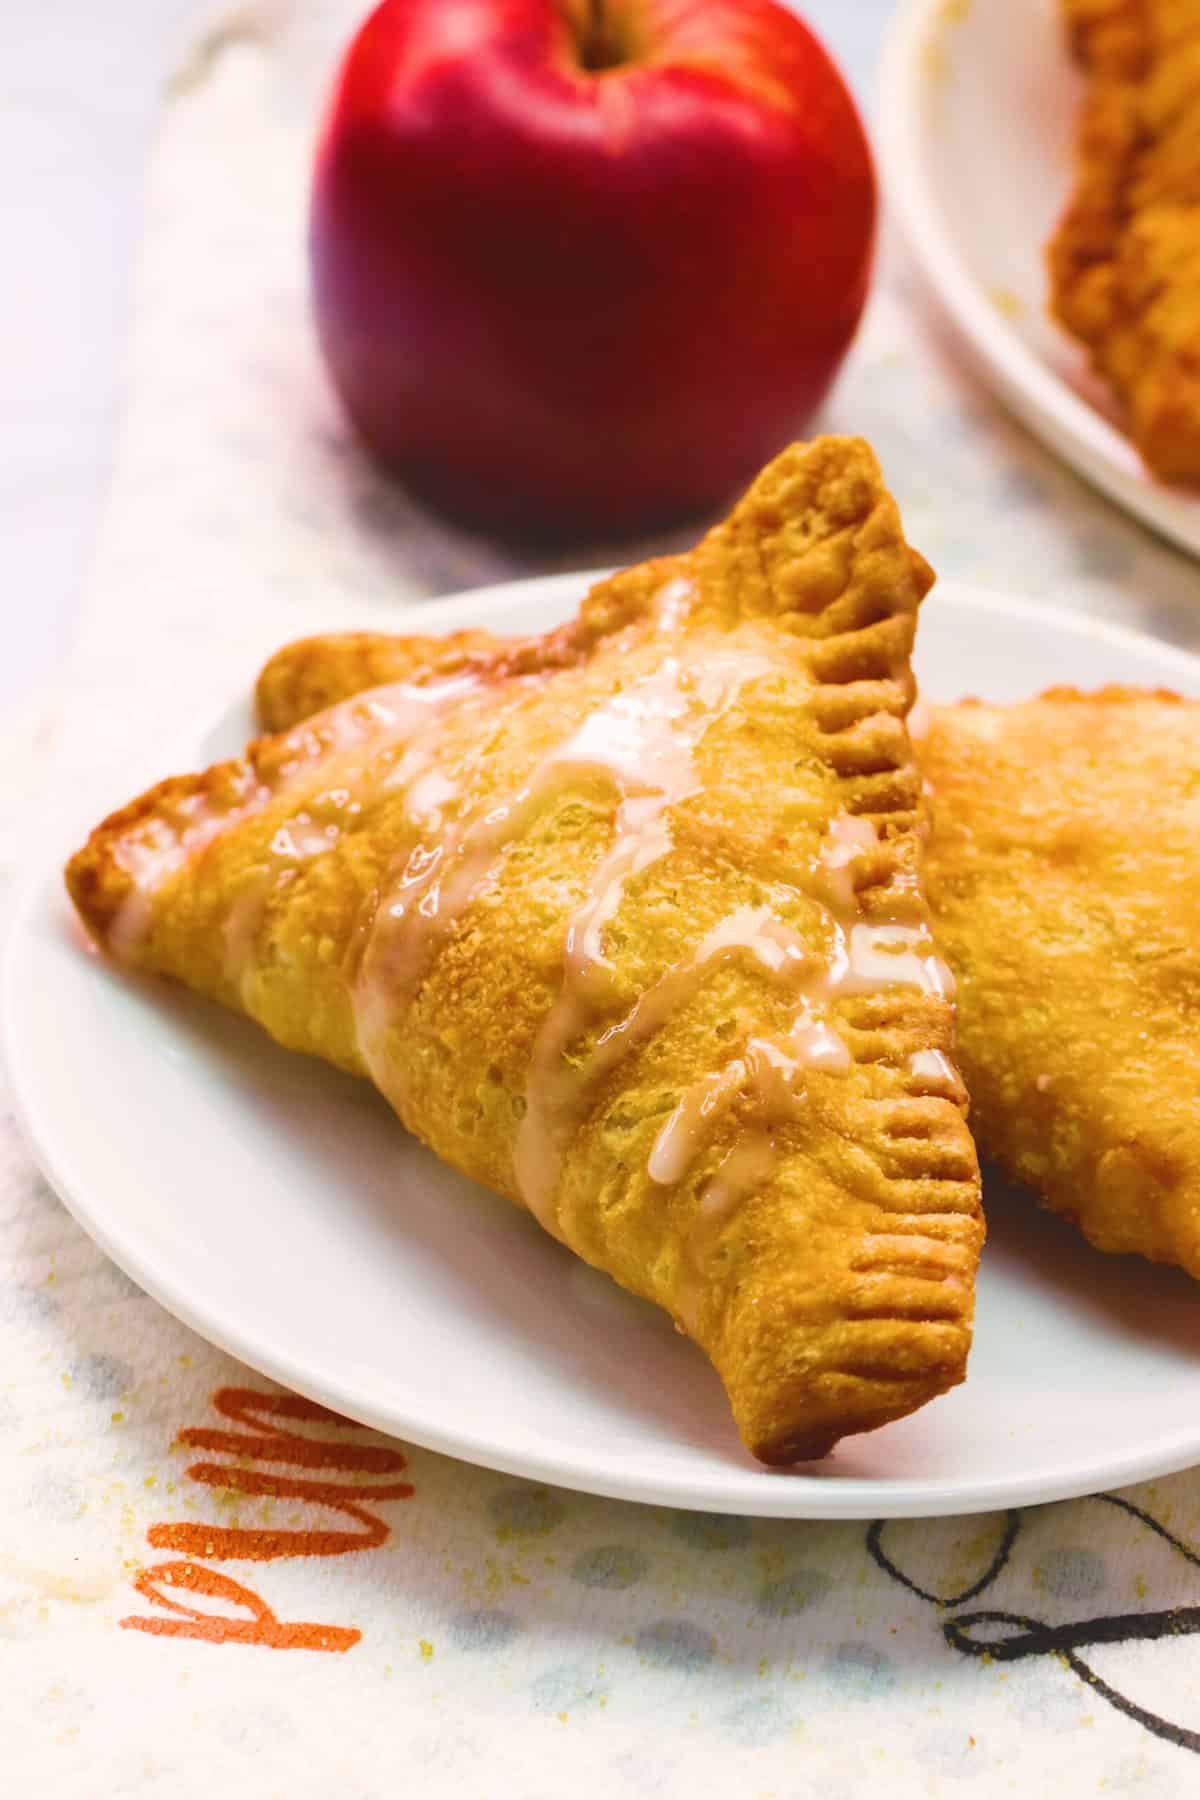 Fried Apple Pie – Warm, soft apple filling encased in a flaky golden pastry crust